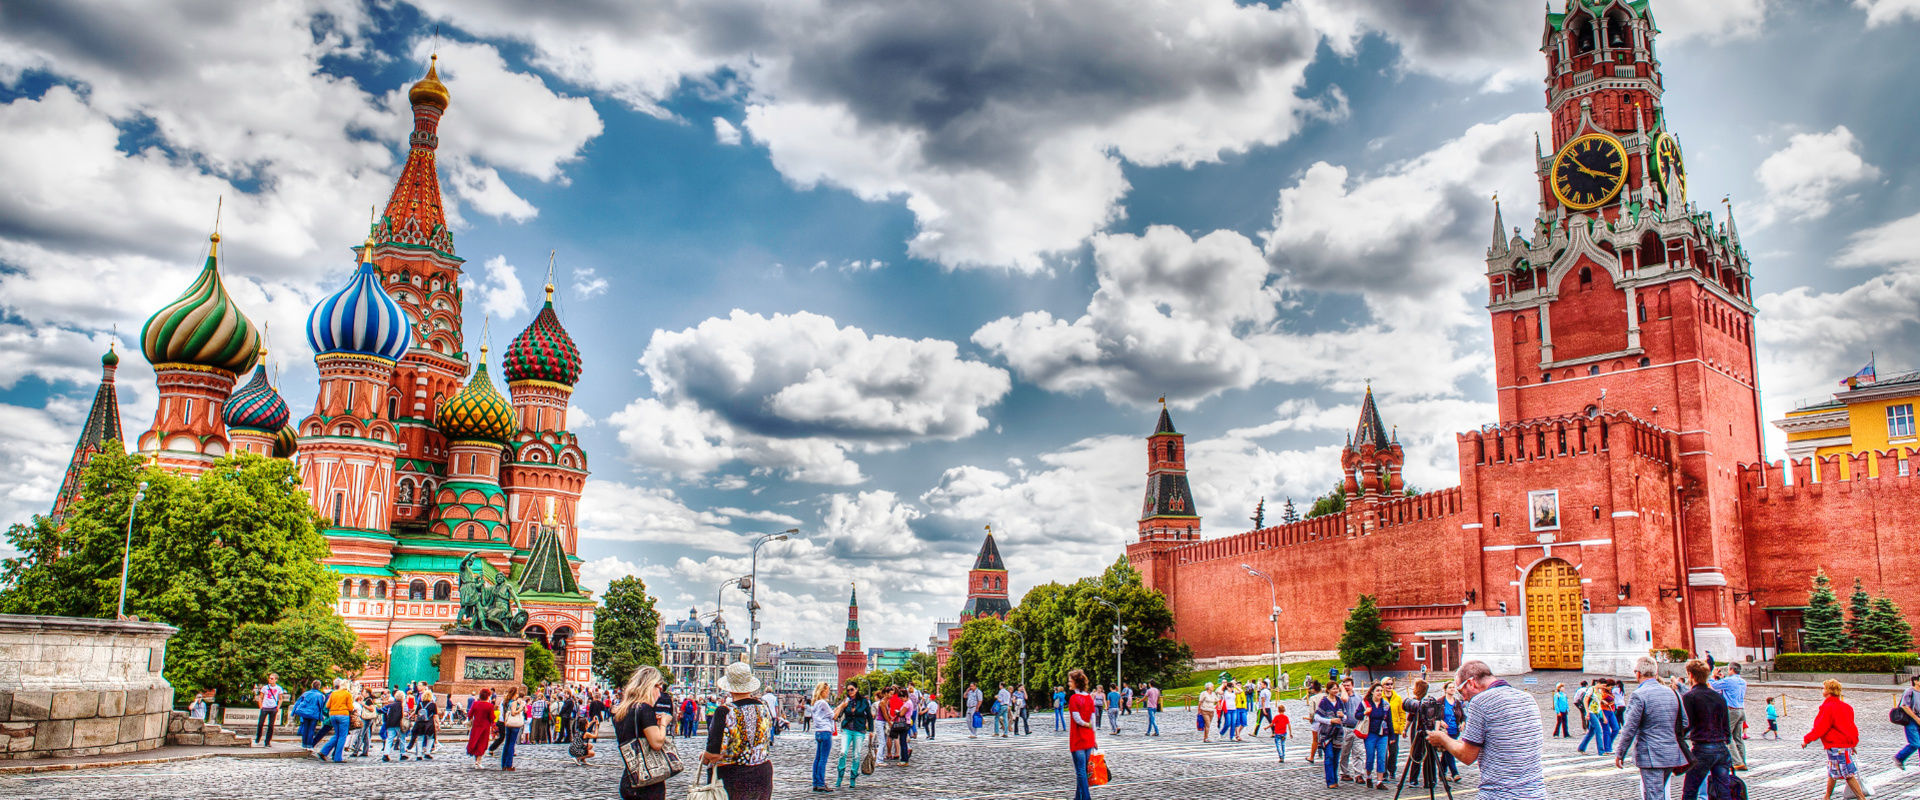 Athens to Moscow private jet charter flights